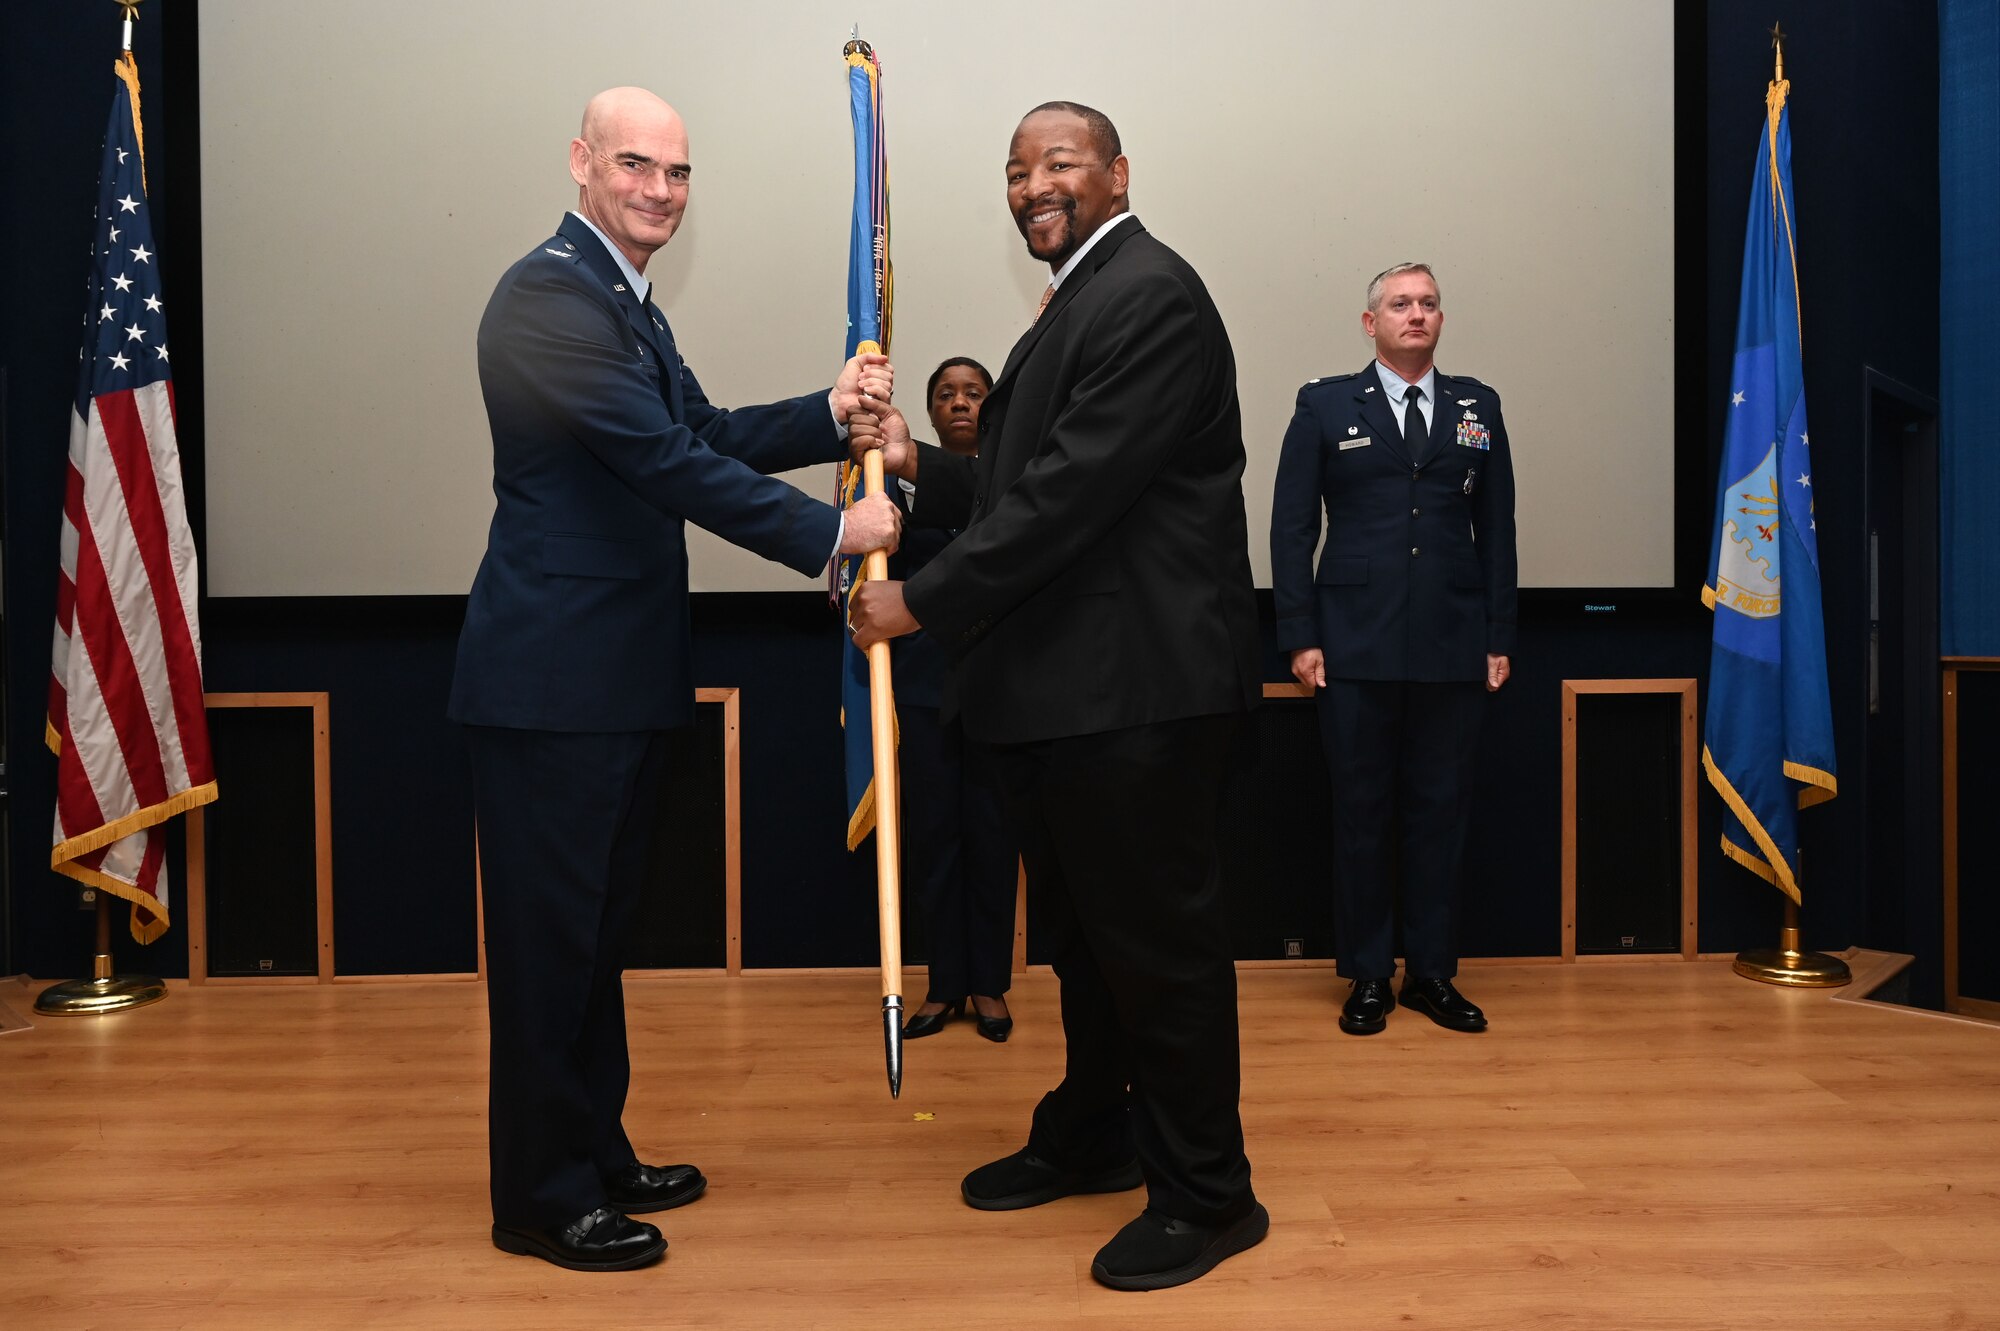 Col. William Gutermuth, 433rd Airlift Wing commander, hands the 433rd AW guidon to Darnell Smith, inaugural director of intercollegiate athletics for Texas A&M University-San Antonio, Texas, during the Honorary Commanders’ Induction Ceremony on Joint Base San Antonio-Lackland, Oct. 15, 2023. Honorary commanders have opportunities to learn about their units and commanders through C-5M Super Galaxy tours, demonstrations, events and flights.